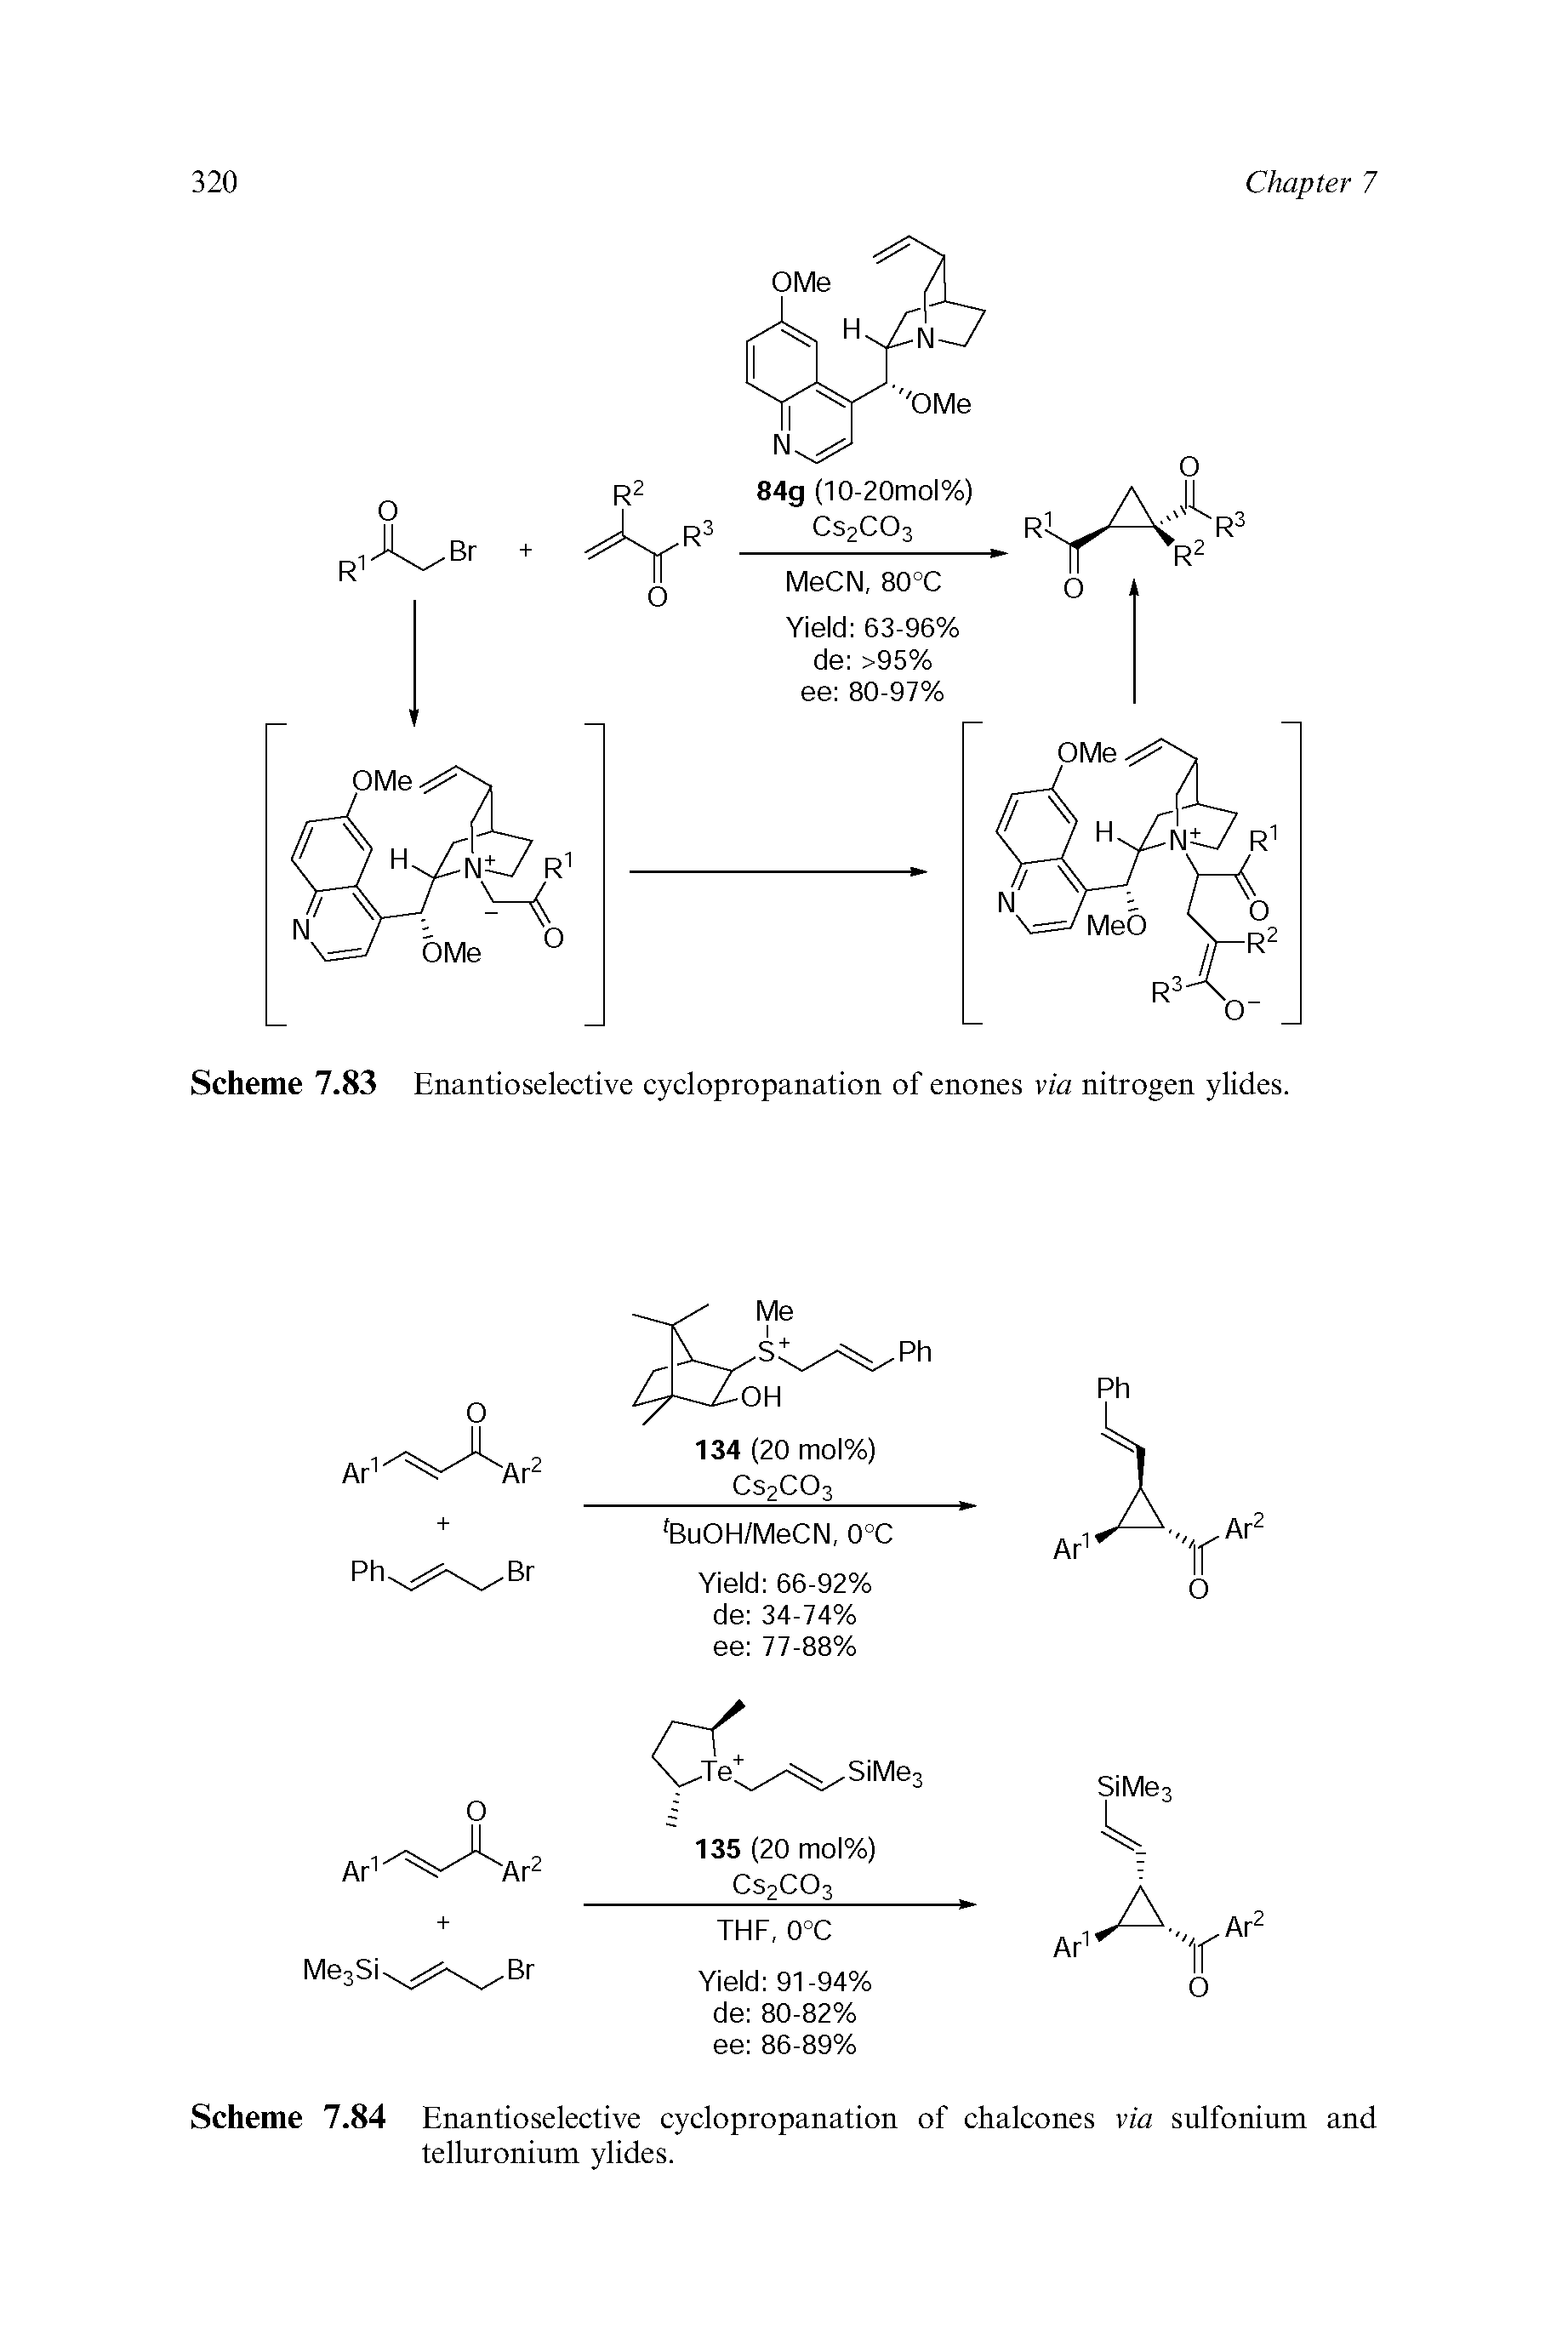 Scheme 7.84 Enantioselective cyclopropanation of chalcones via sulfonium and telluronium ylides.